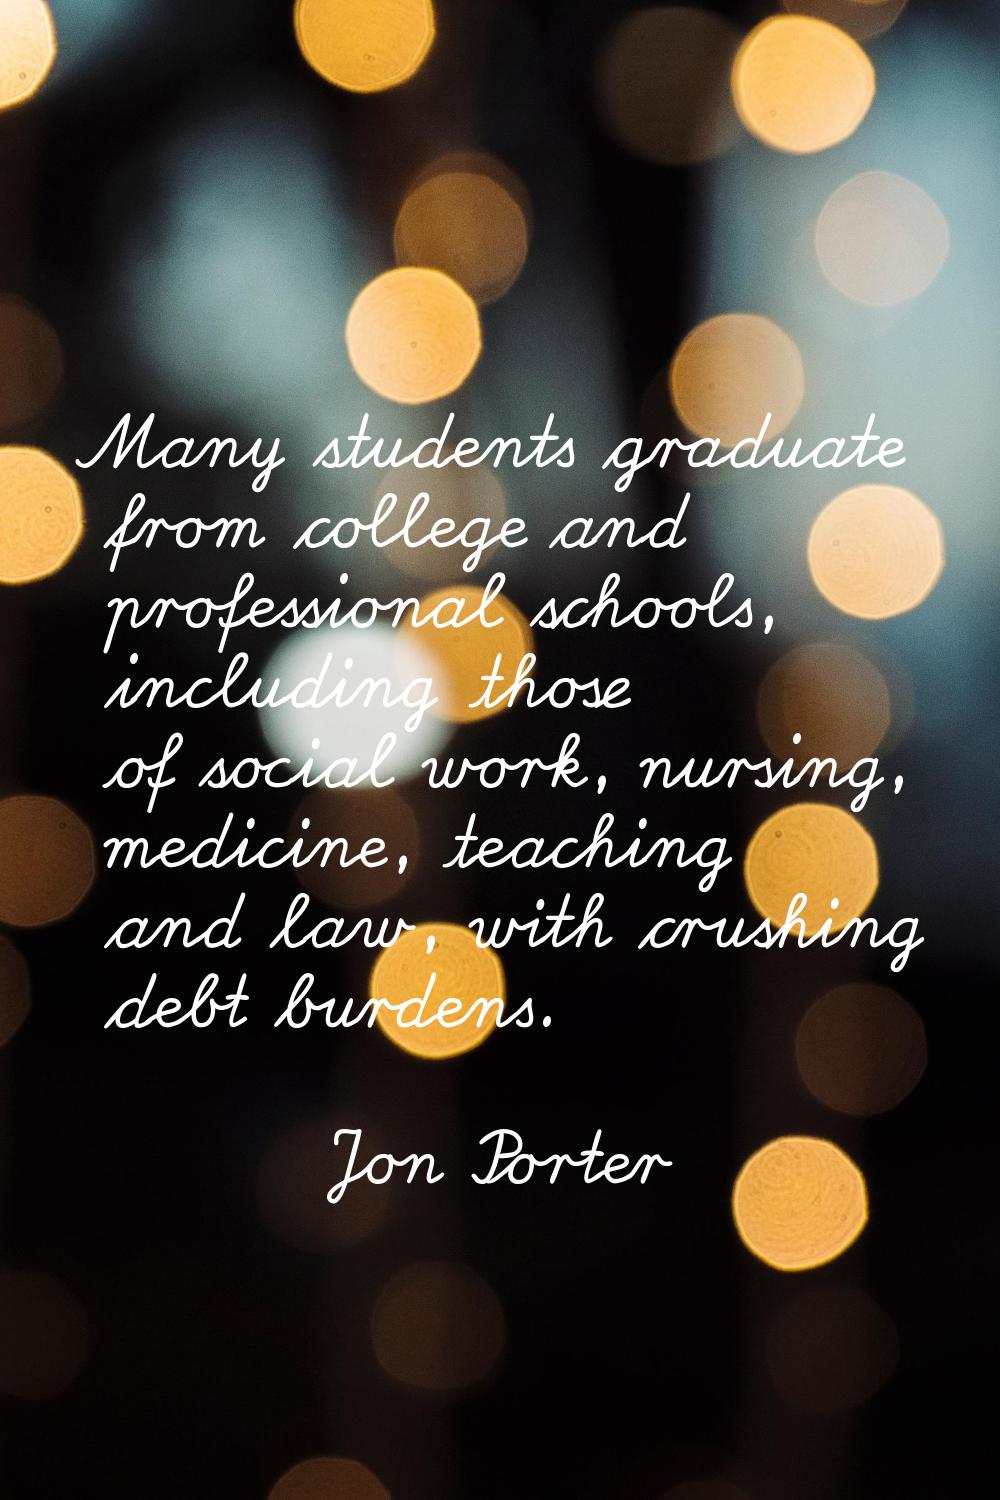 Many students graduate from college and professional schools, including those of social work, nursi